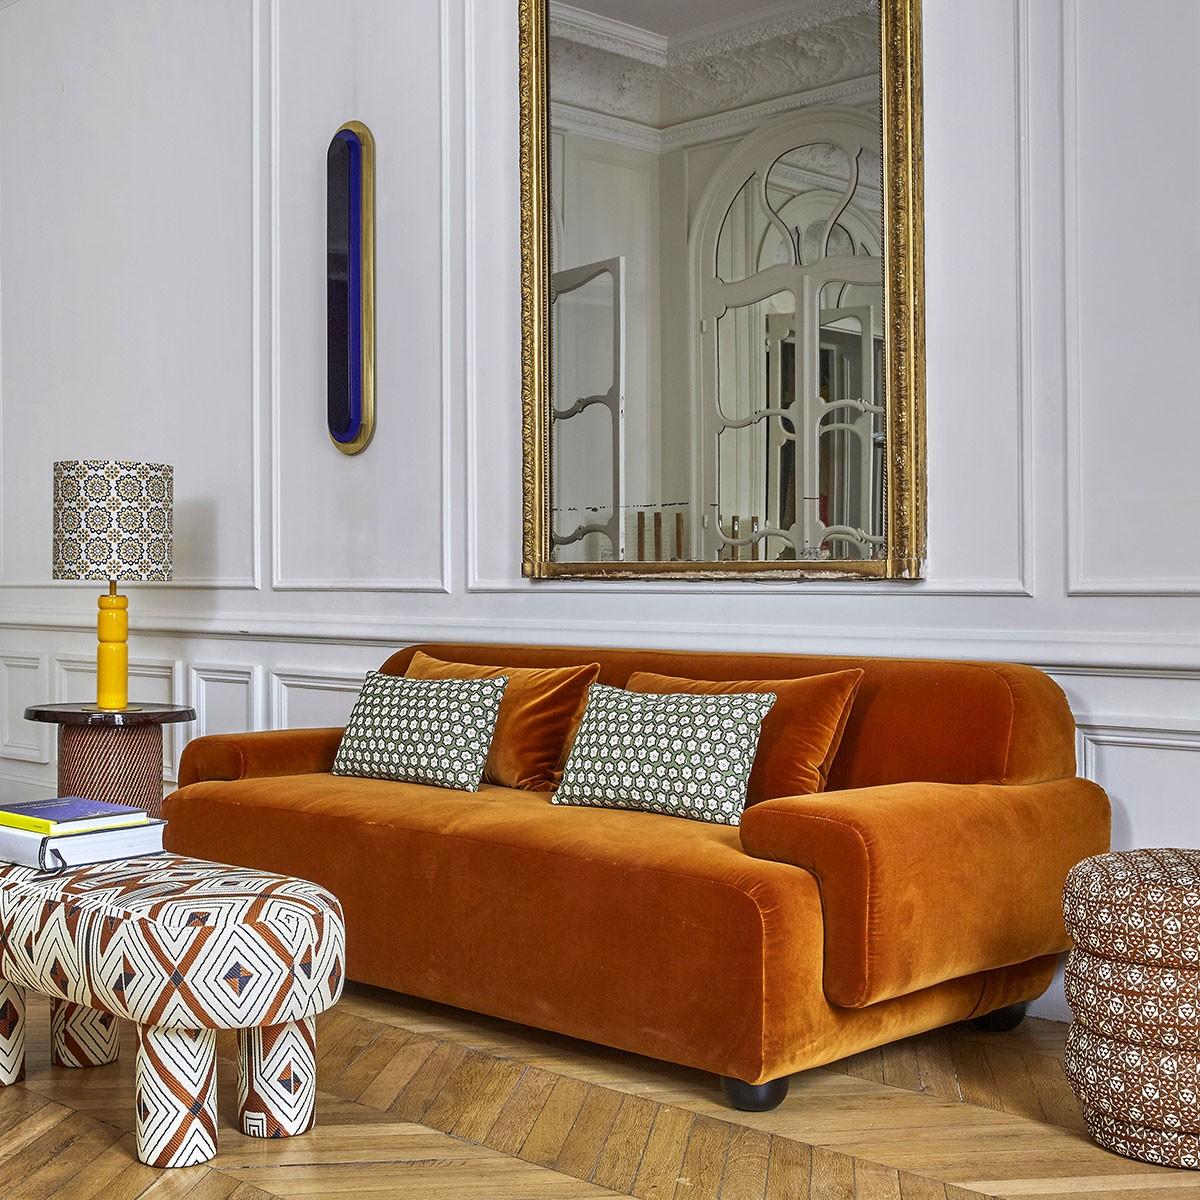 Popus Editions Lena 3-Seater Sofa in Indigo Marrakech Jacquard Upholstery In New Condition For Sale In Paris, FR